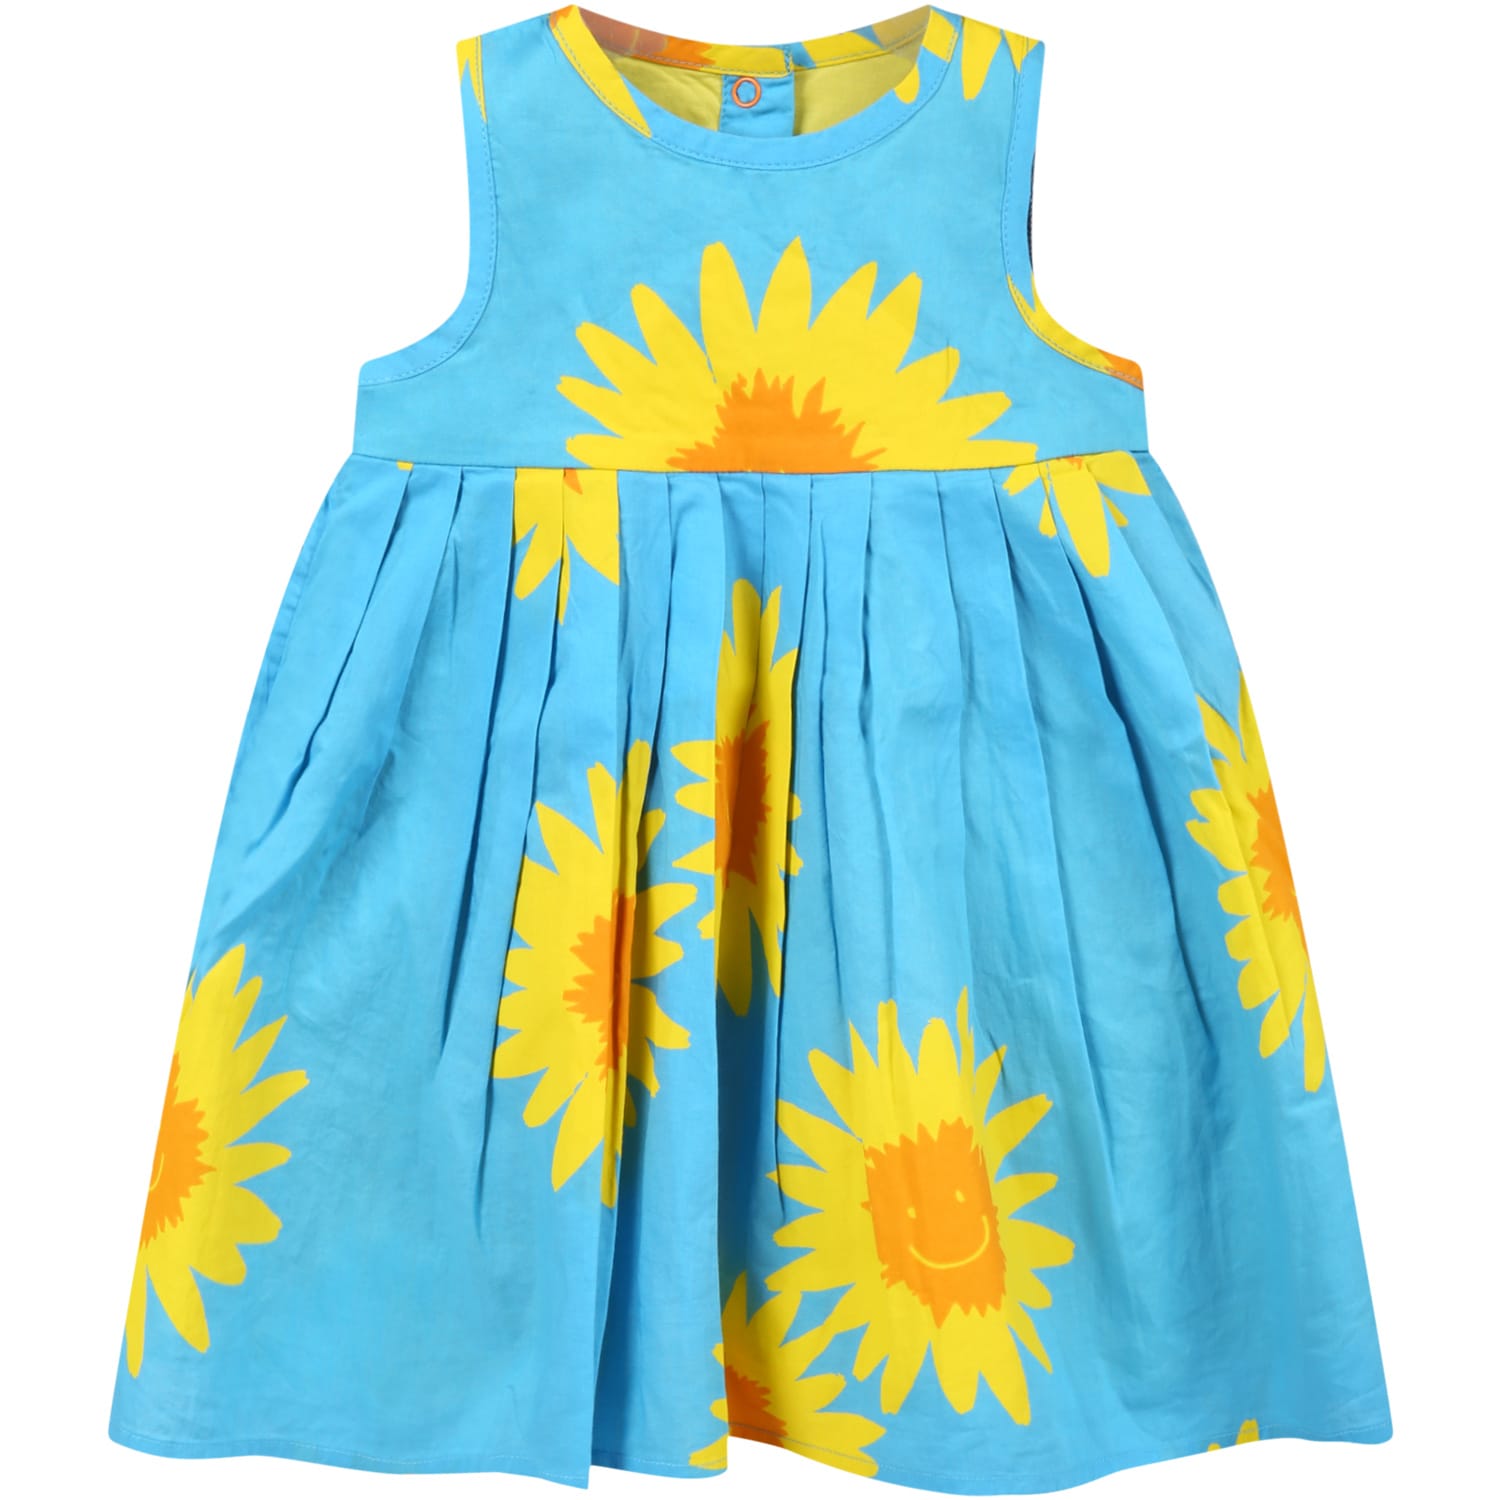 Stella McCartney Kids Light-blue Dress For Baby Girl With Yellow Daisies